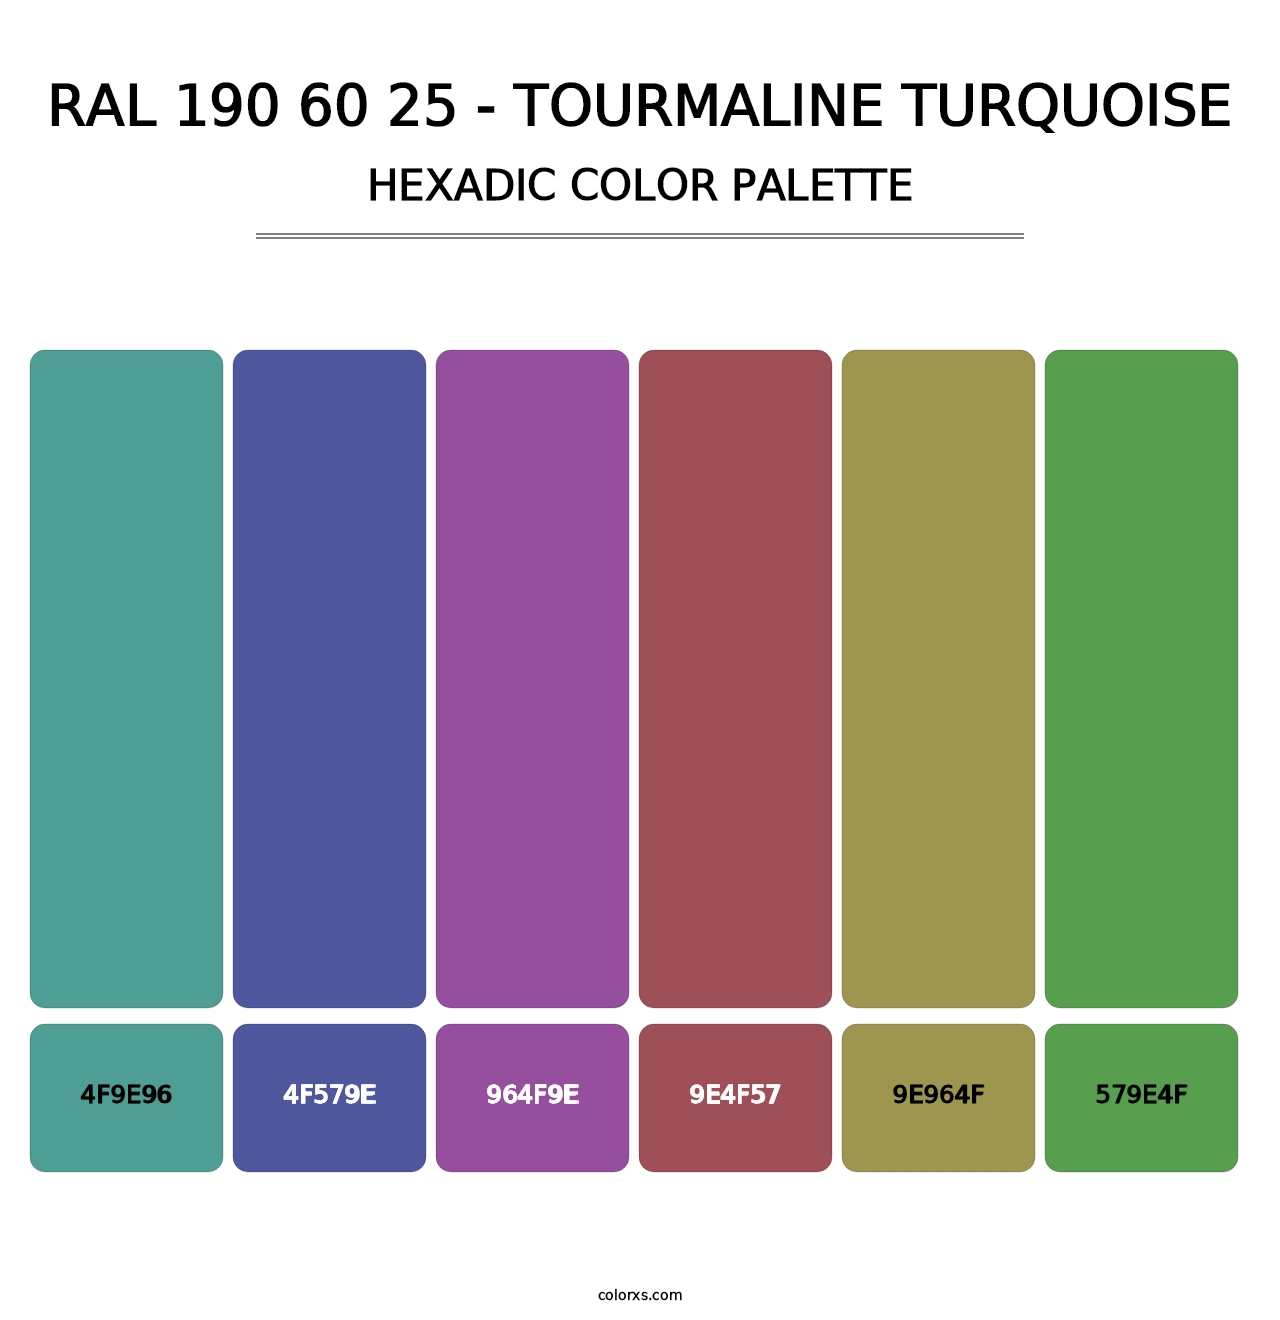 RAL 190 60 25 - Tourmaline Turquoise - Hexadic Color Palette